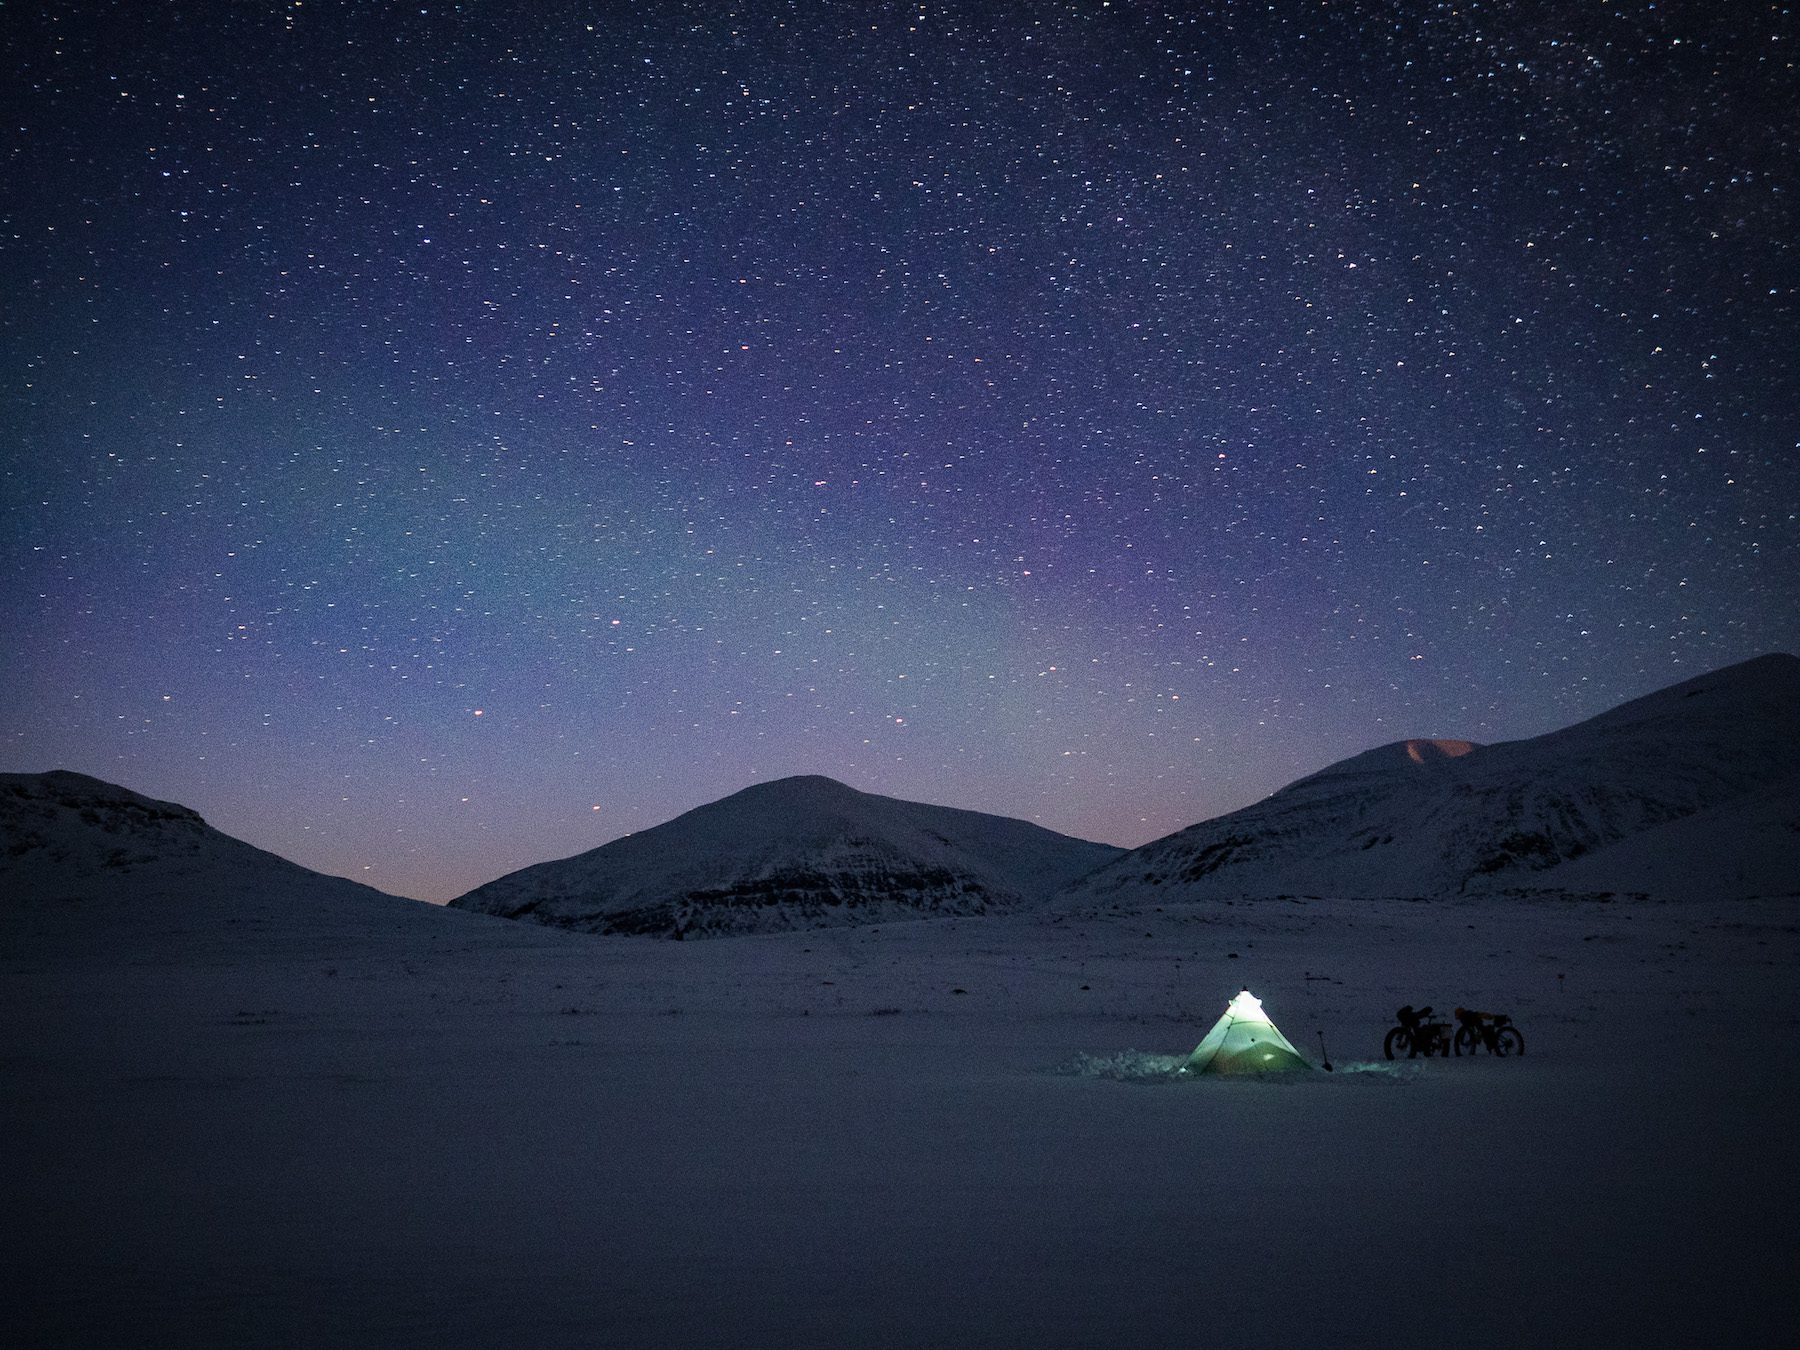 "Night times often make indelible impressions. Although we never saw the penetrating northern lights we saw in Iceland, we lay in the tent, cosy in a sleeping bag, gazing out as the stars pirouetted and the faint aurora danced above, whilst our breath tinkled and grew crystals around the sleeping bag hood. It was something incredibly special." ~Annie Le Evans